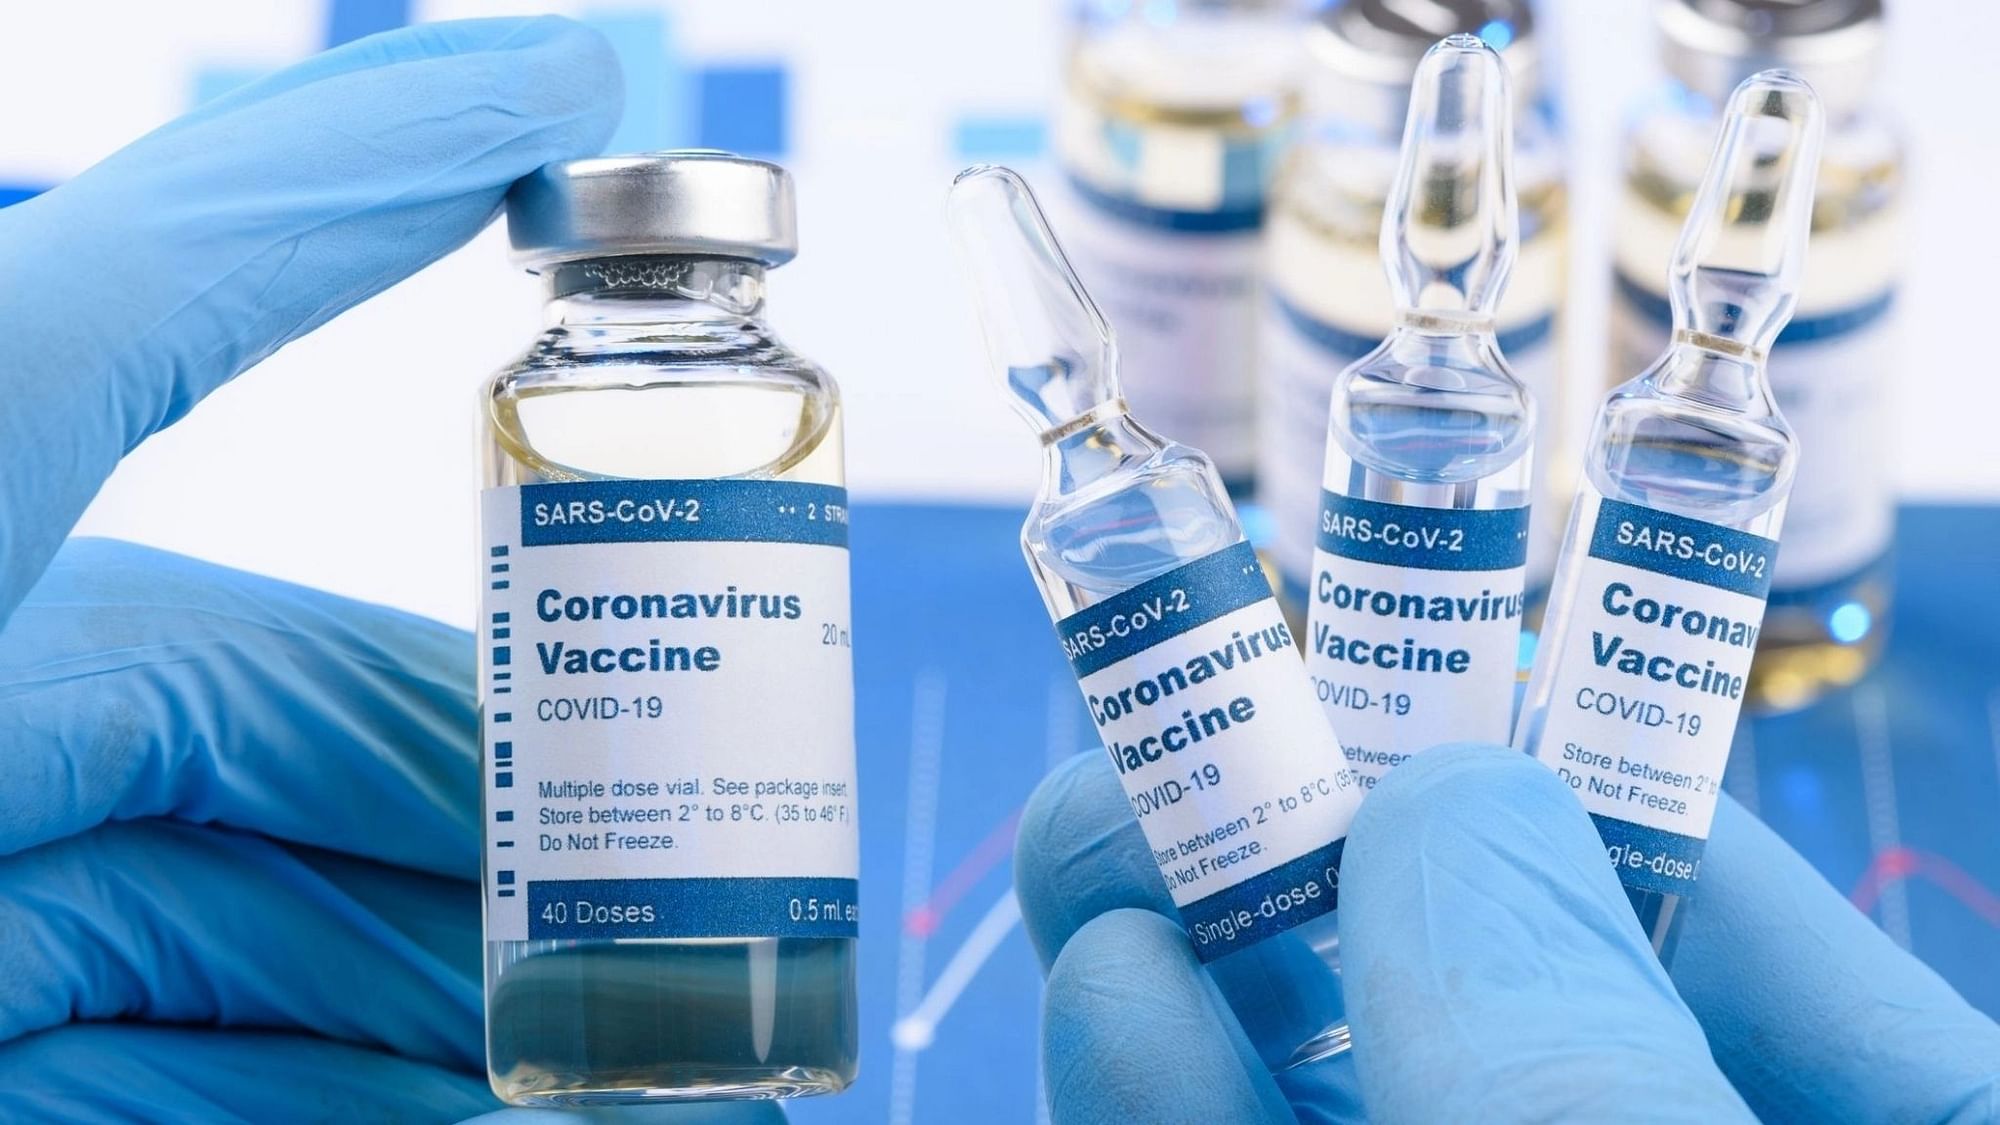 Only 0.9 percent of people in low-income countries have received at least one dose of the COVID-19 vaccine.